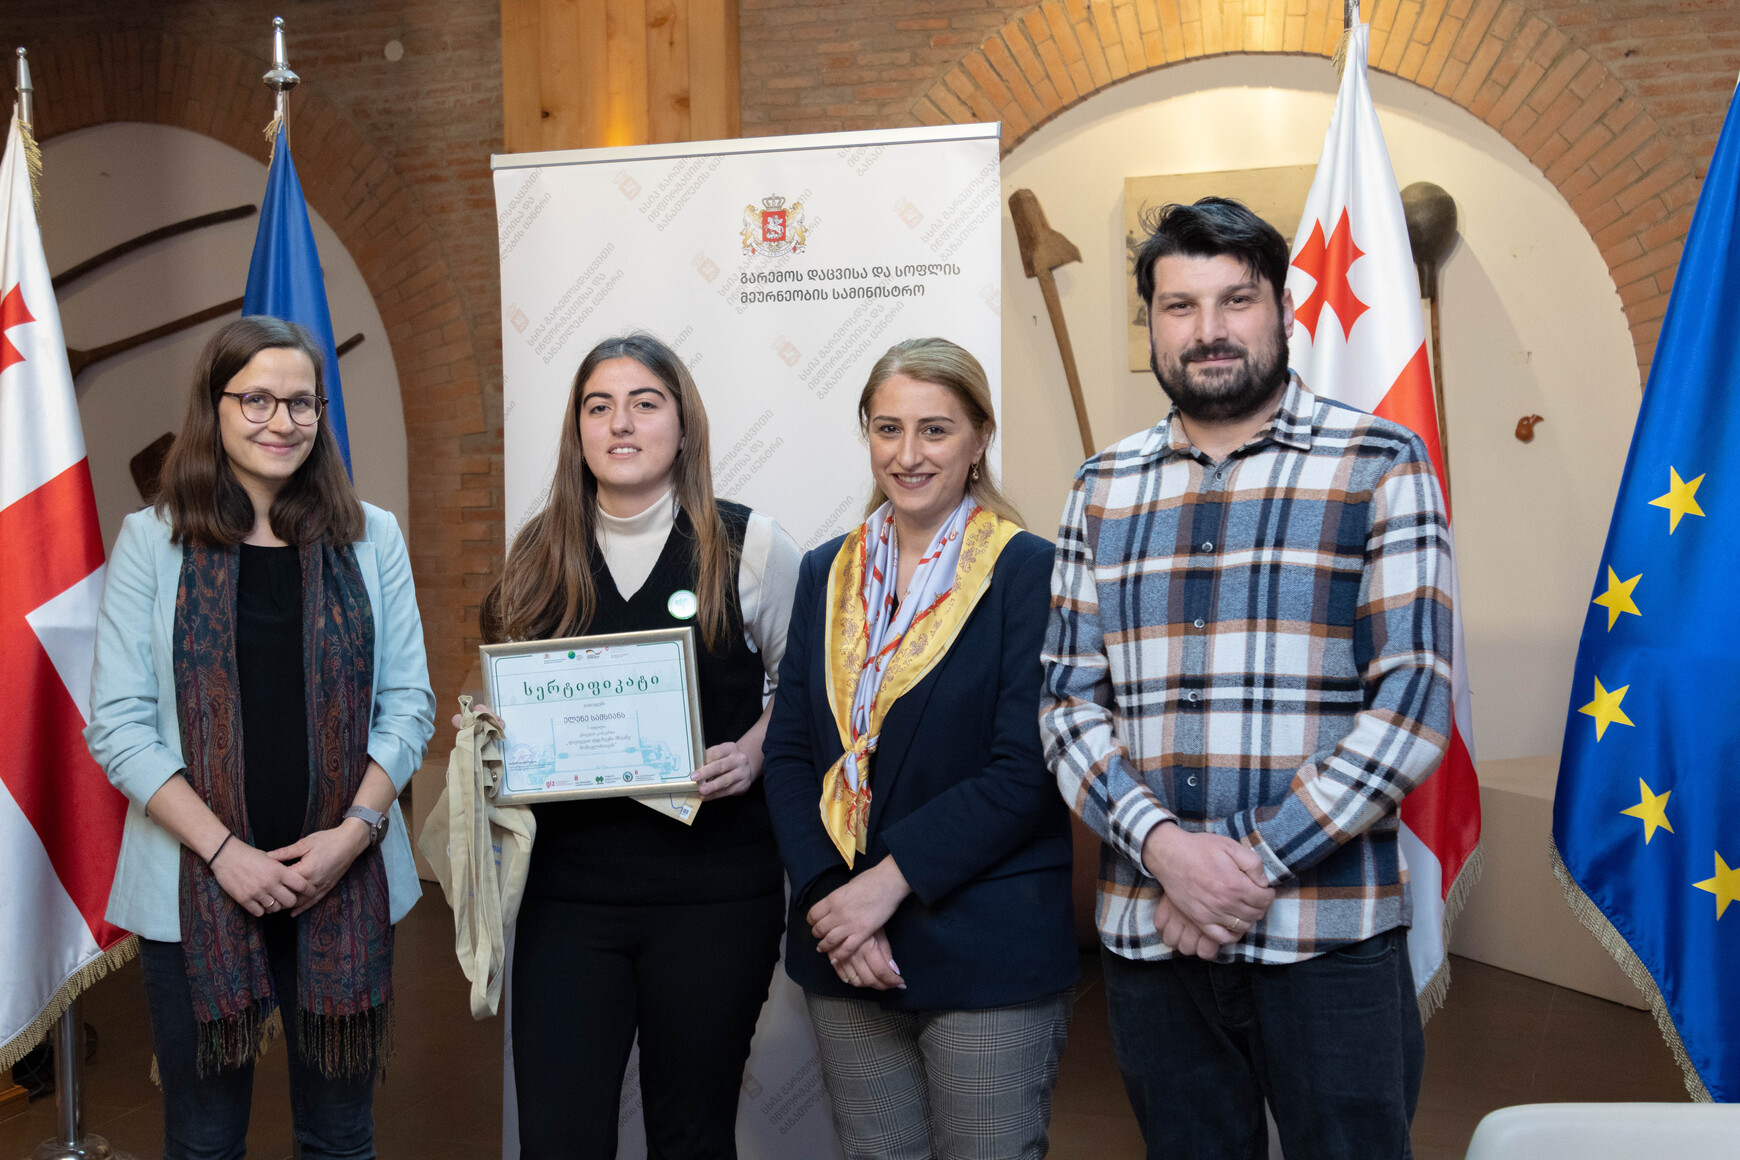 The winners of the "Let's Protect the Forest for Our Green Future" contest were awarded